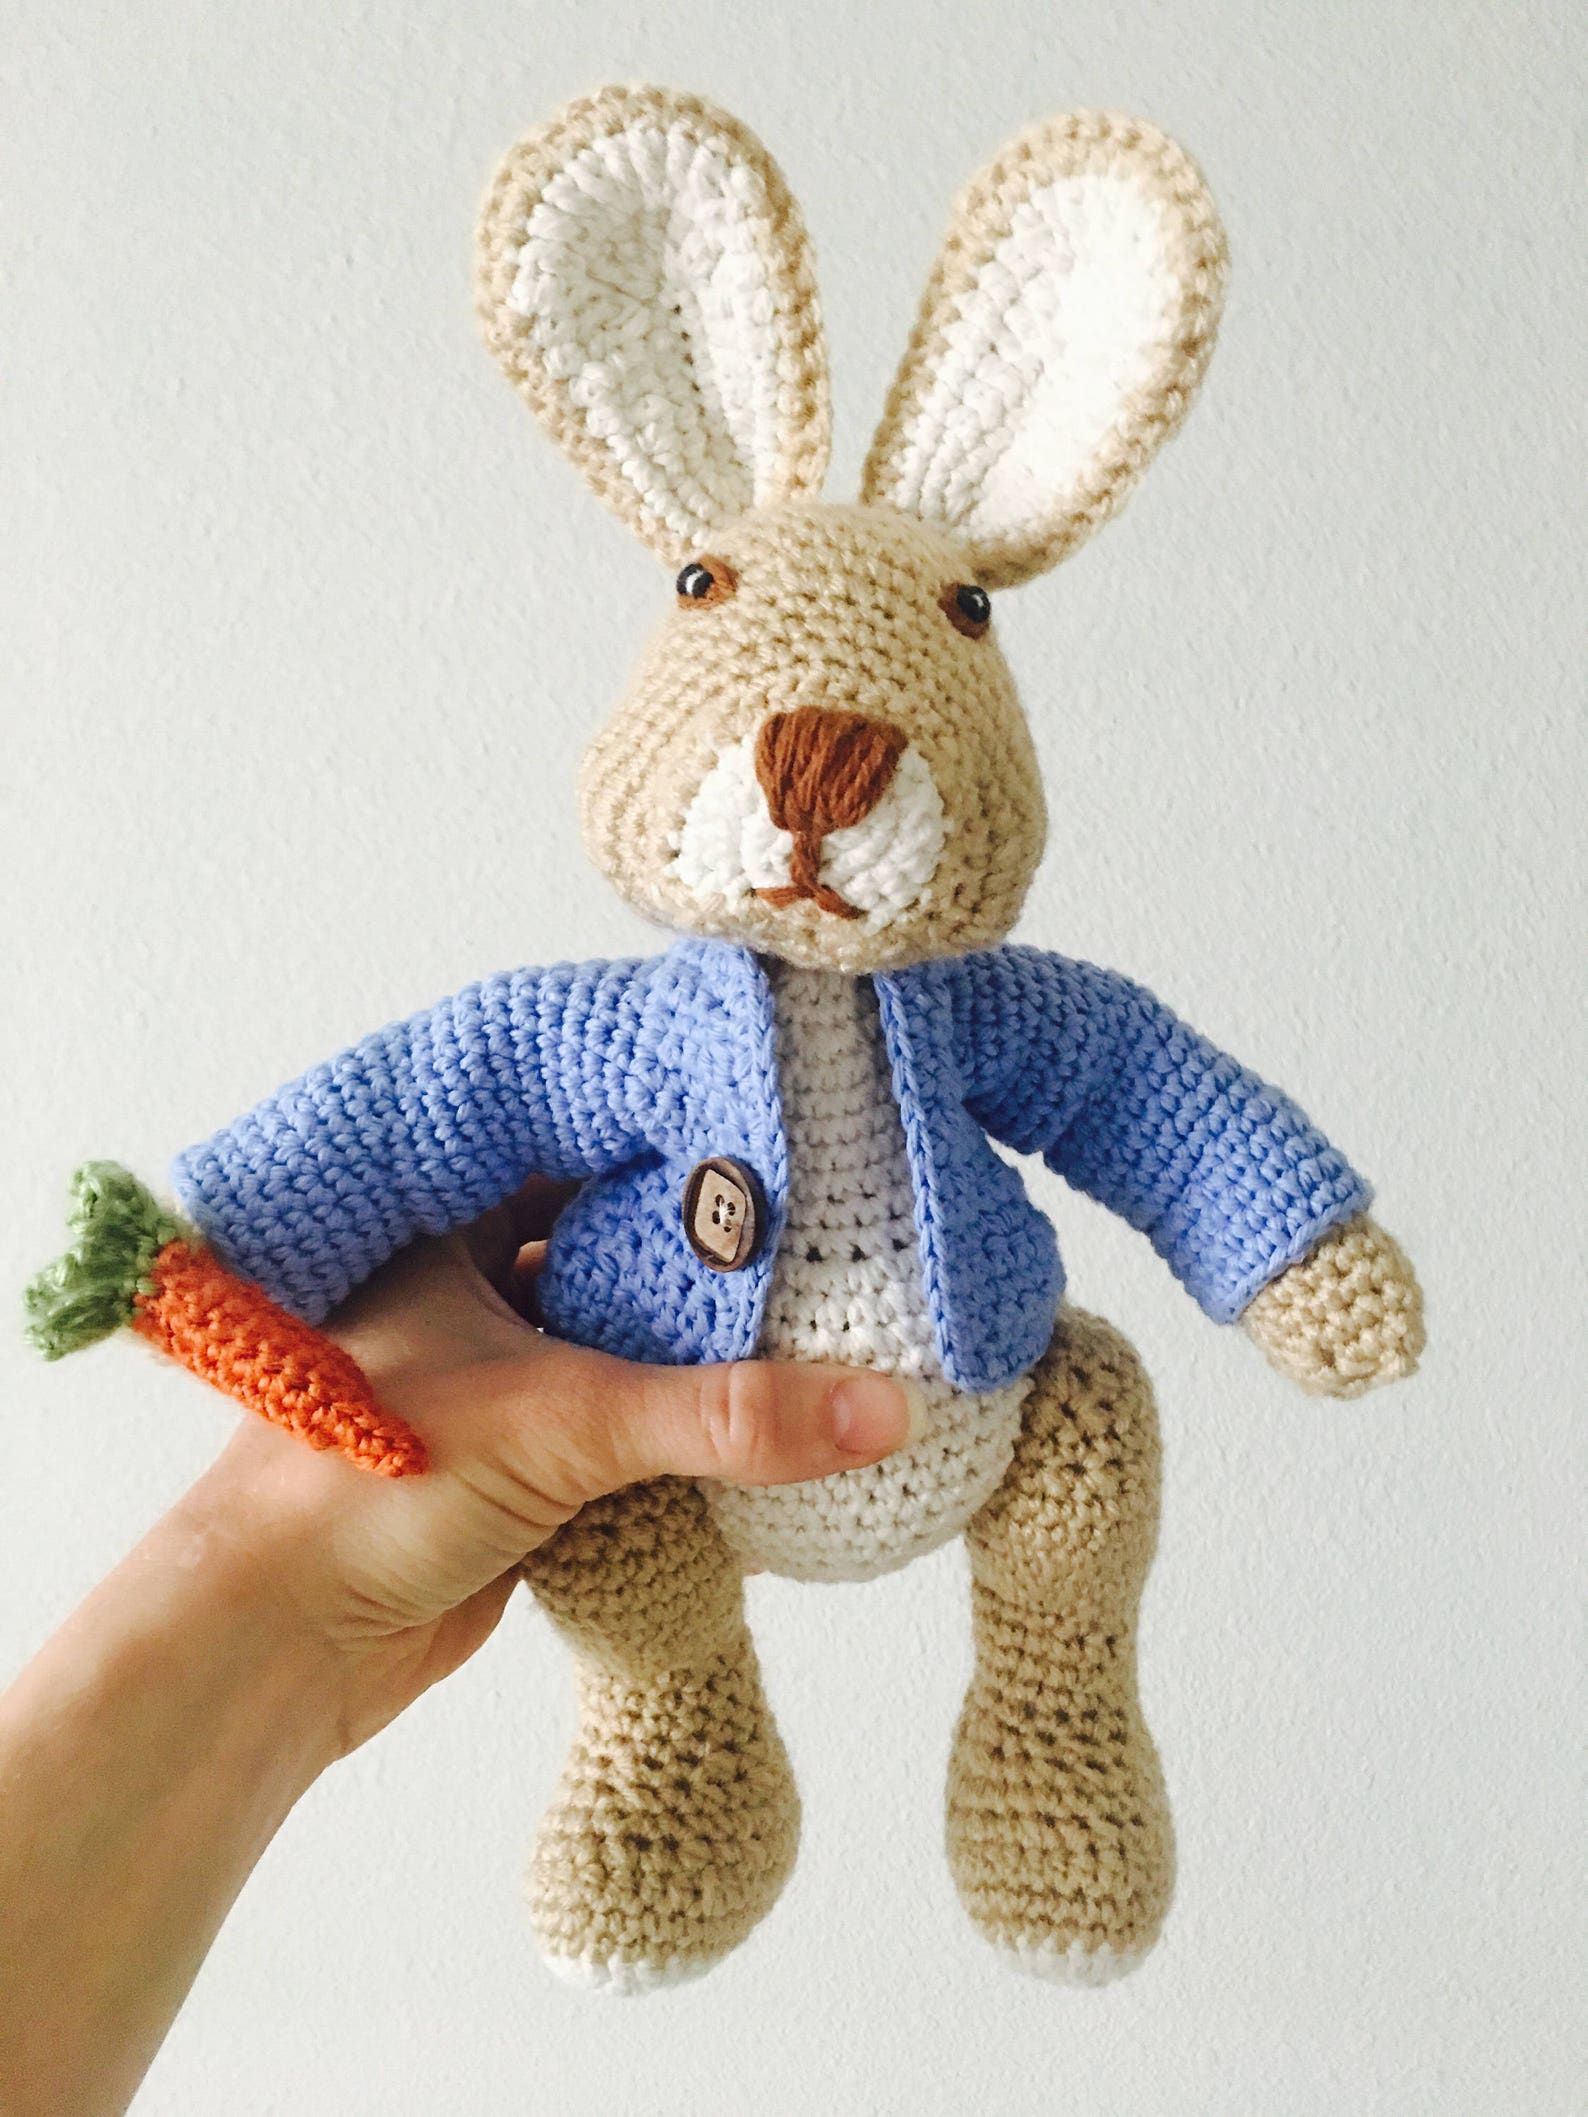 A crocheted Peter Rabbit stuffed toy, wearing a blue cardigan and holding a carrot.